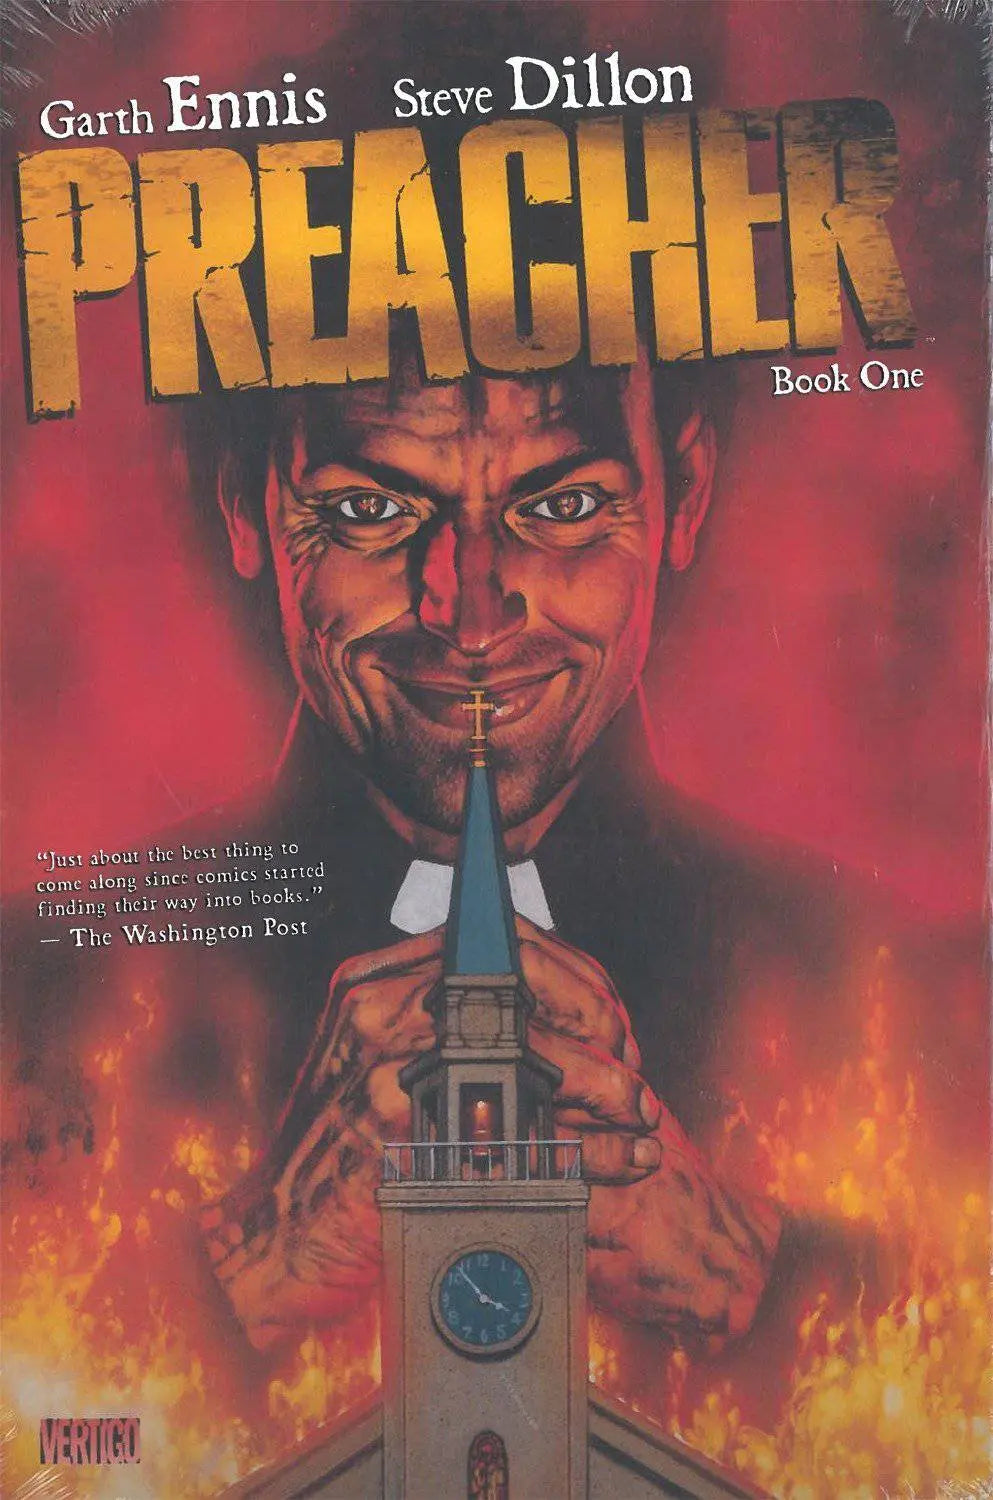 Preacher Book One   Illustrated, June 18 2013 King Gaming